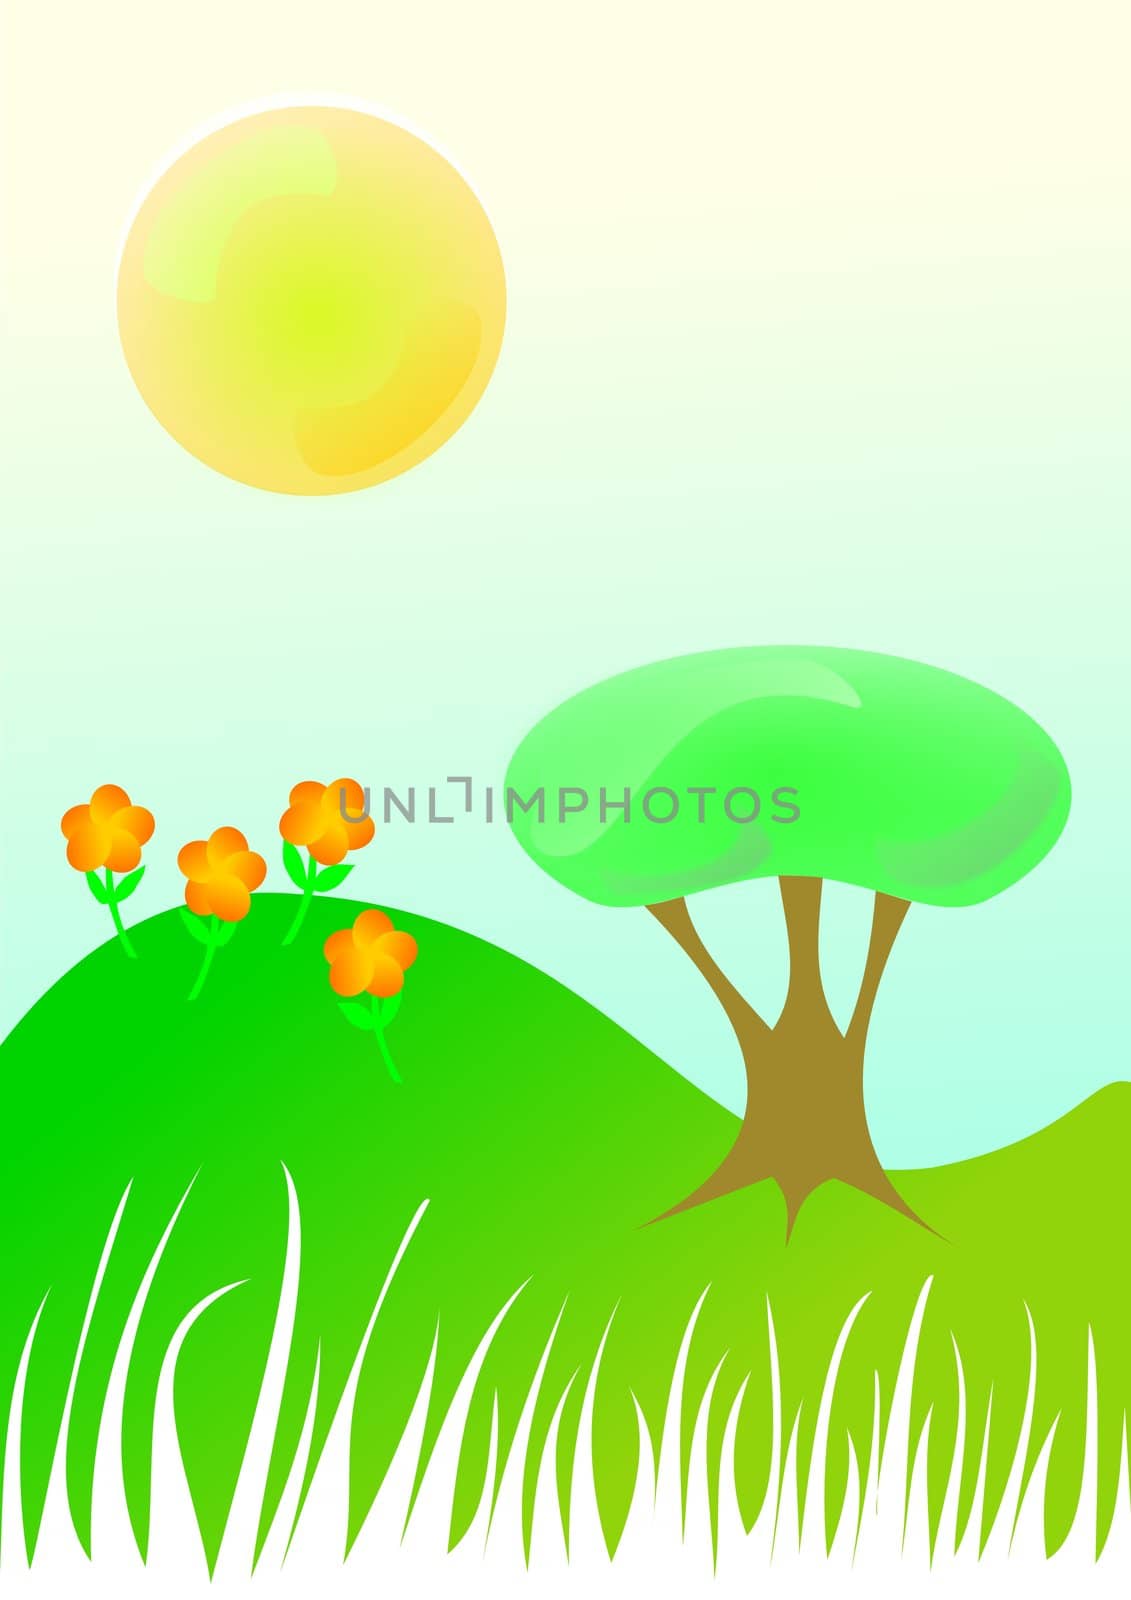 Vector illustration representing a clean environment.